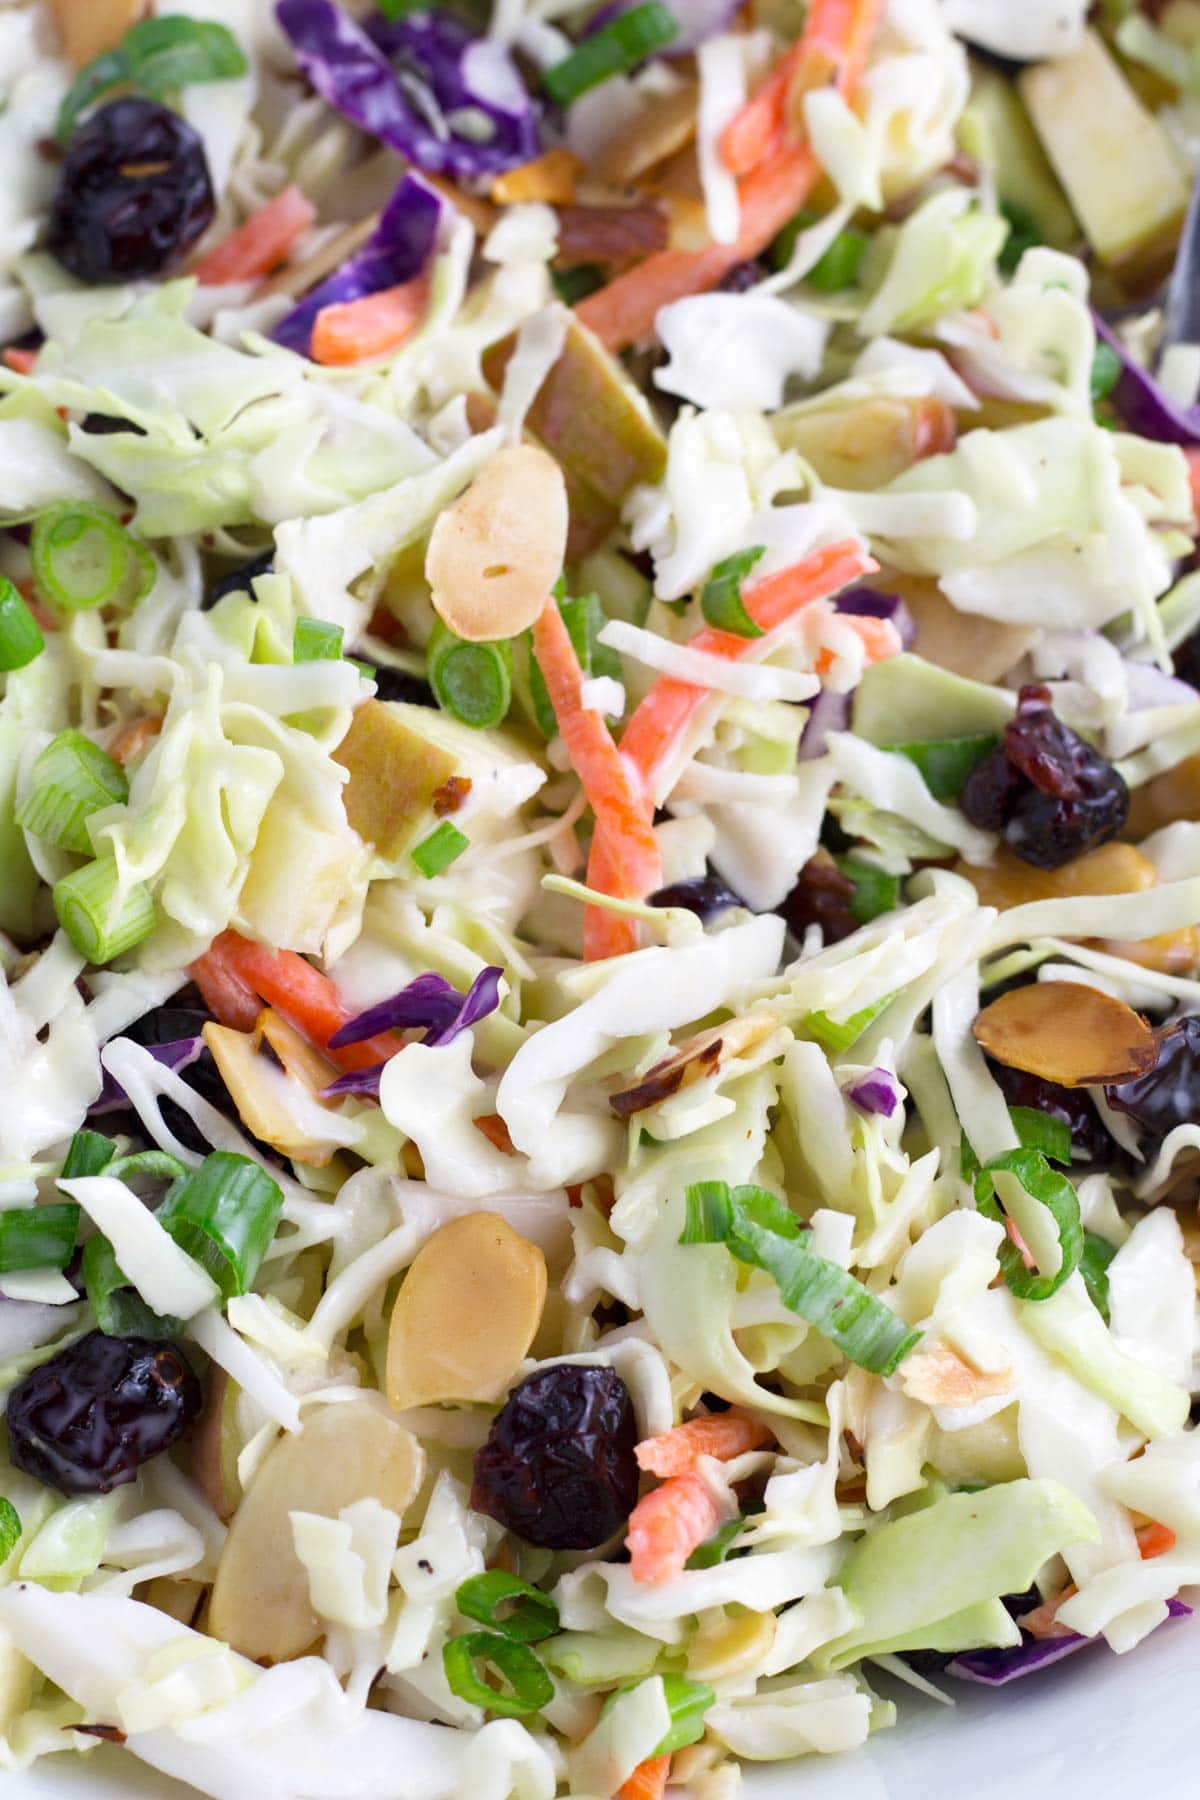 Up close view of coleslaw with apples tossed in apple vinaigrette.